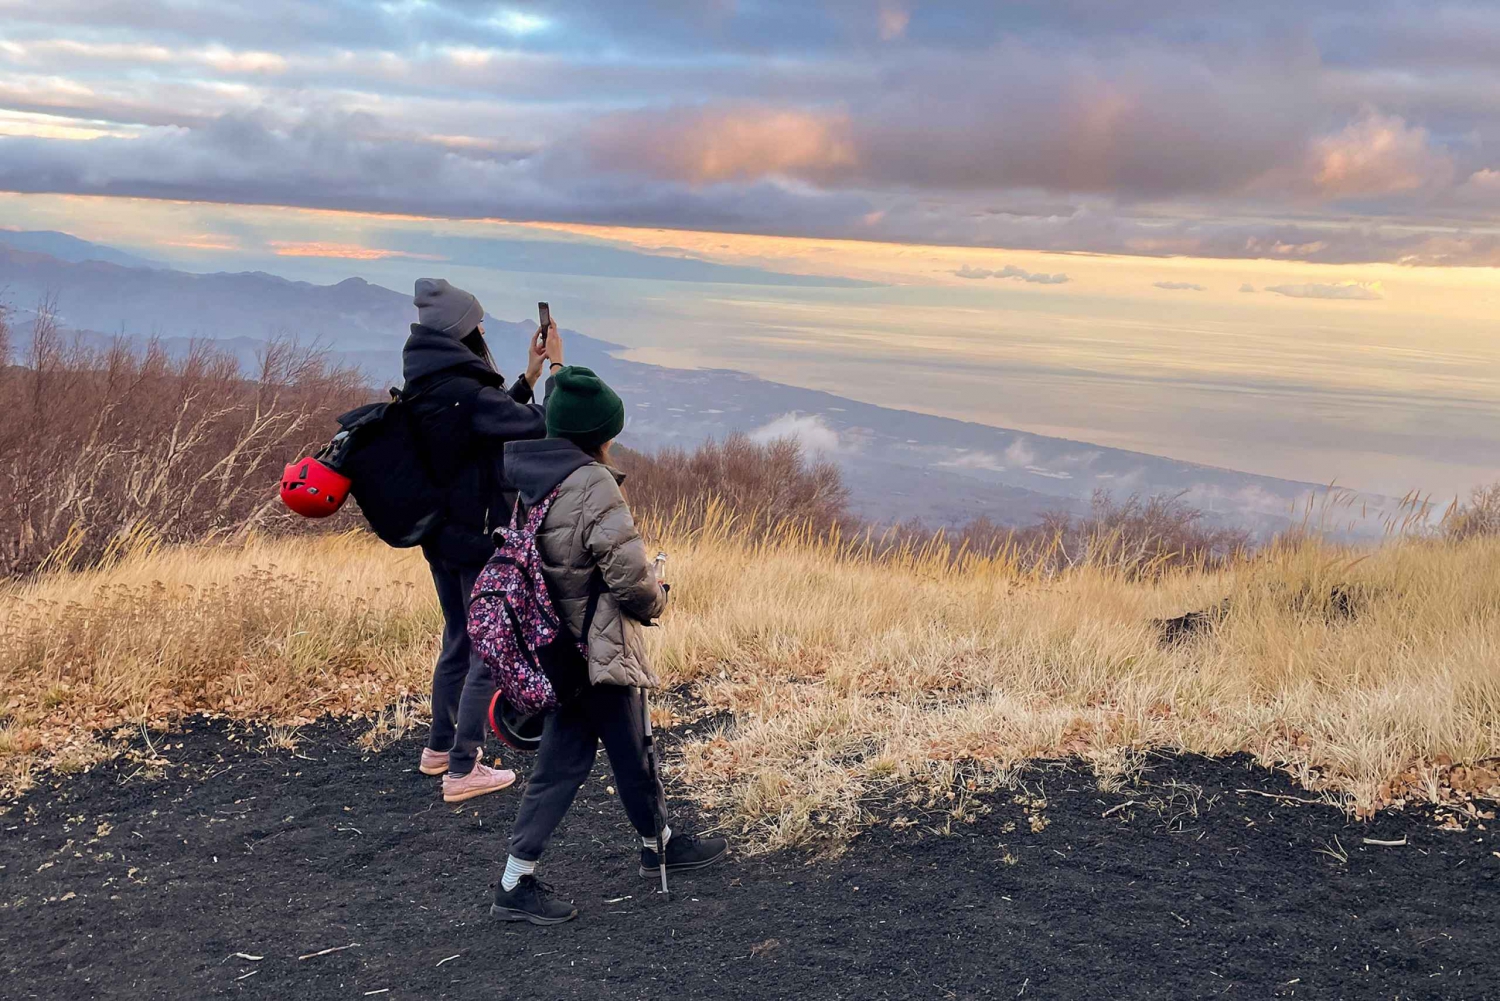 Etna: Guided Excursion, Trekking Tour on the volcano